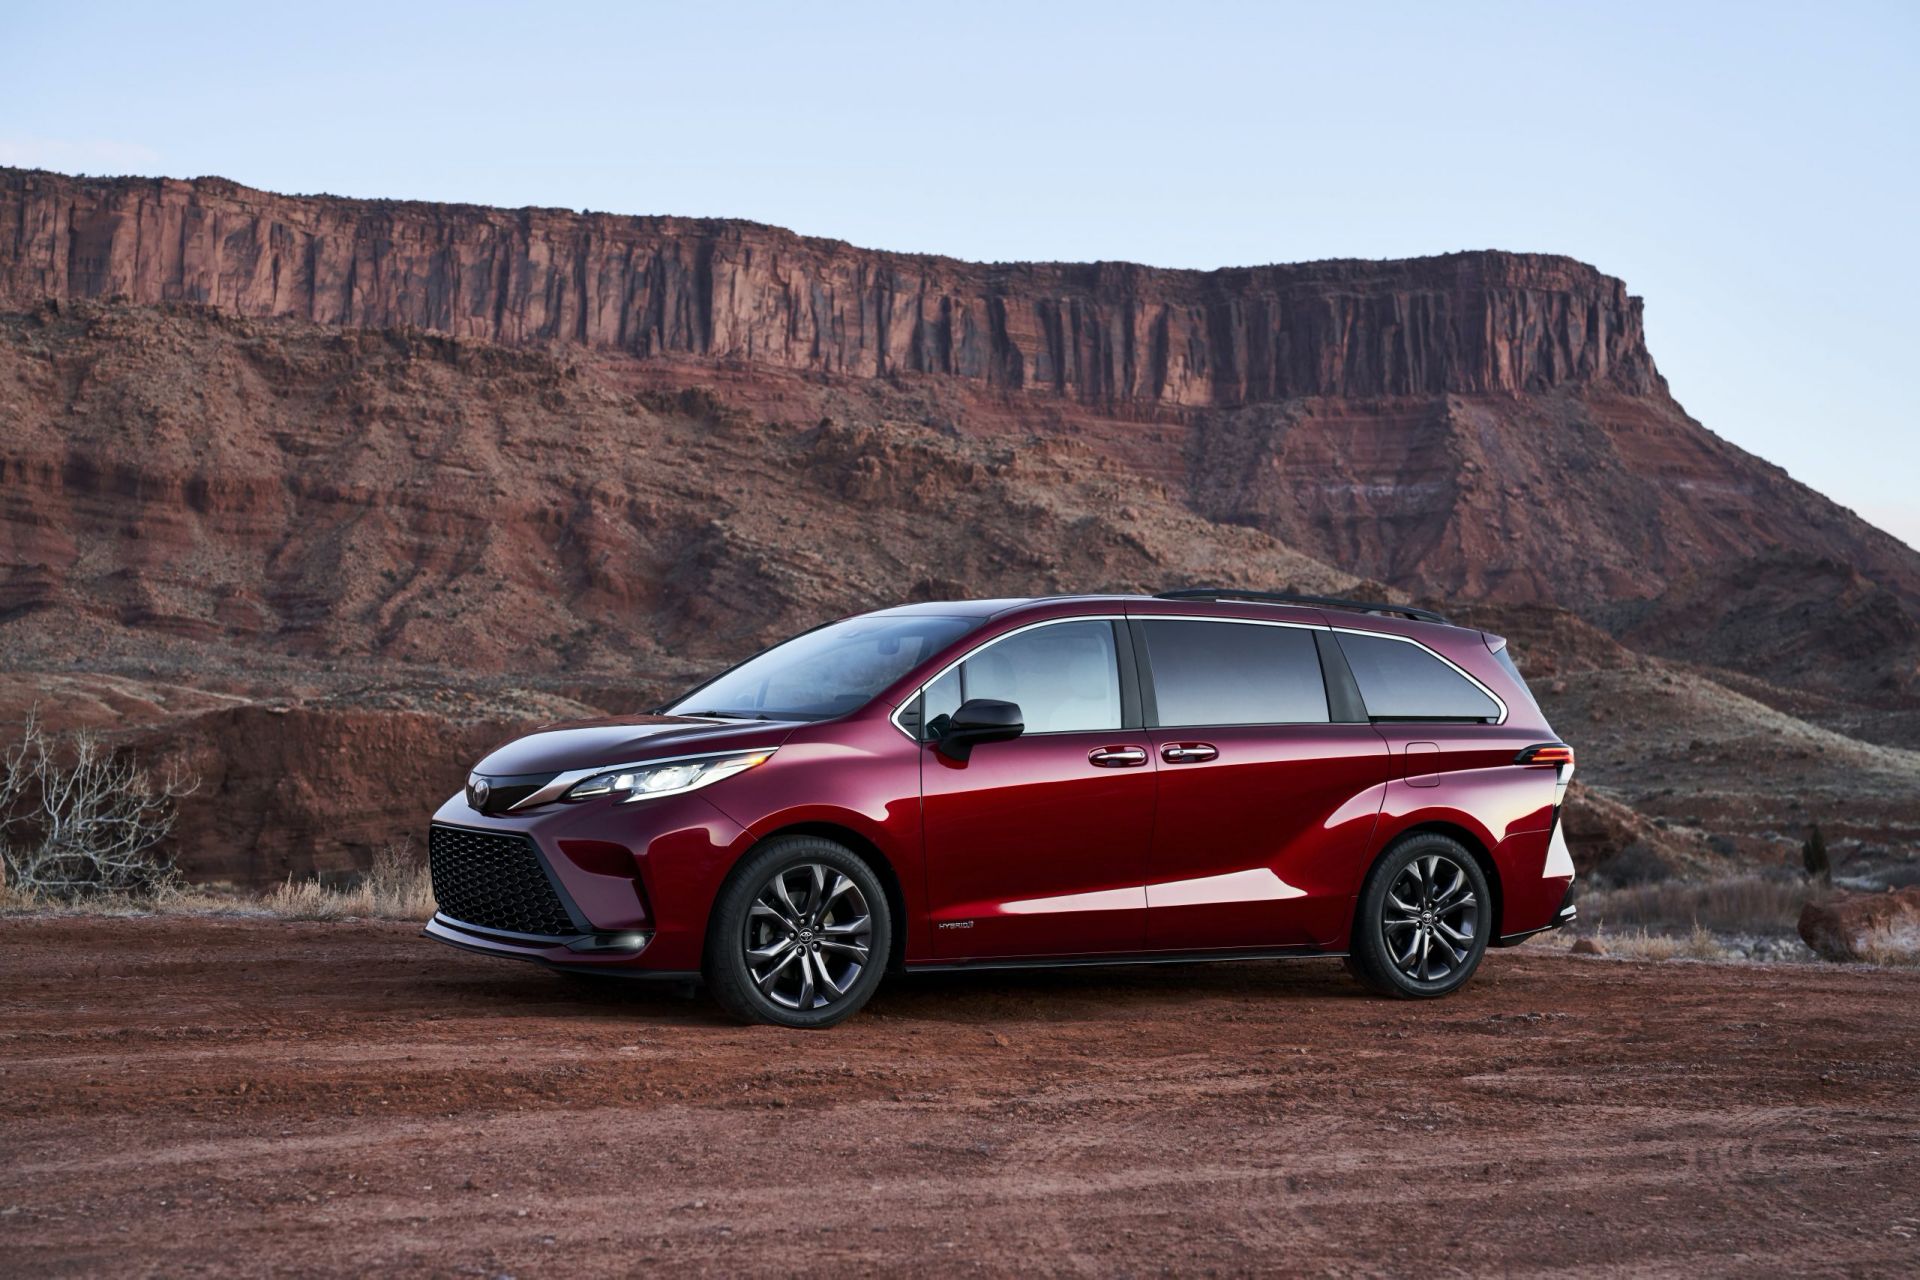 2021 Toyota Sienna Unveiled as Bold New Hybrid Minivan With Available